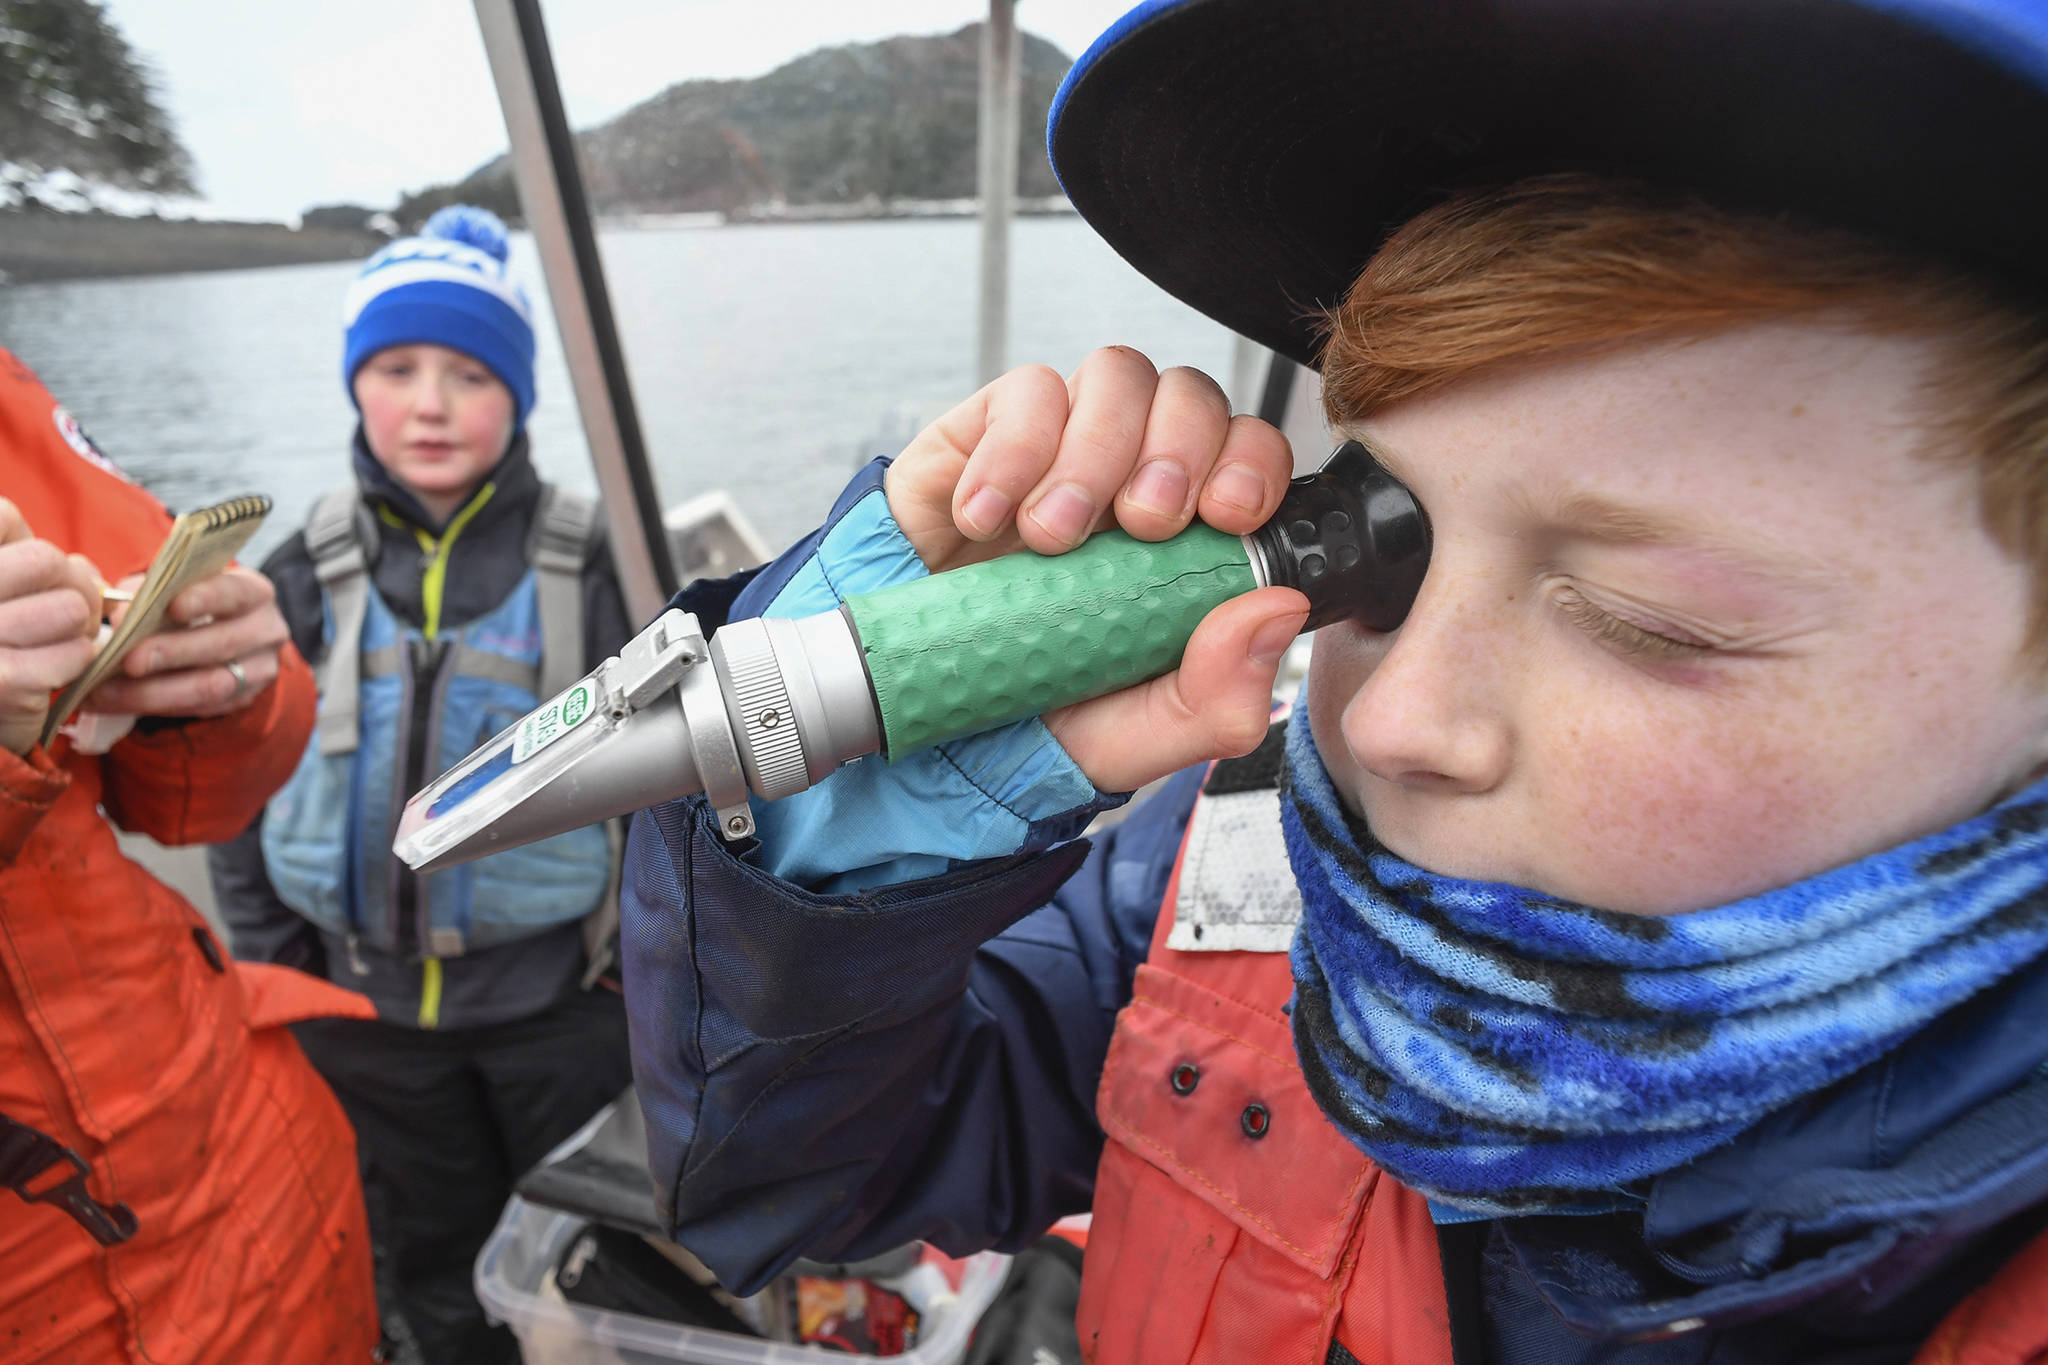 Emmett Mesdag, 11, right, takes a salinity reading while visiting their oyster farm with his mother, Meta Mesdag, and brother, Kai, 8, in Bridget Cove on Tuesday, Feb. 12, 2019. (Michael Penn | Juneau Empire)